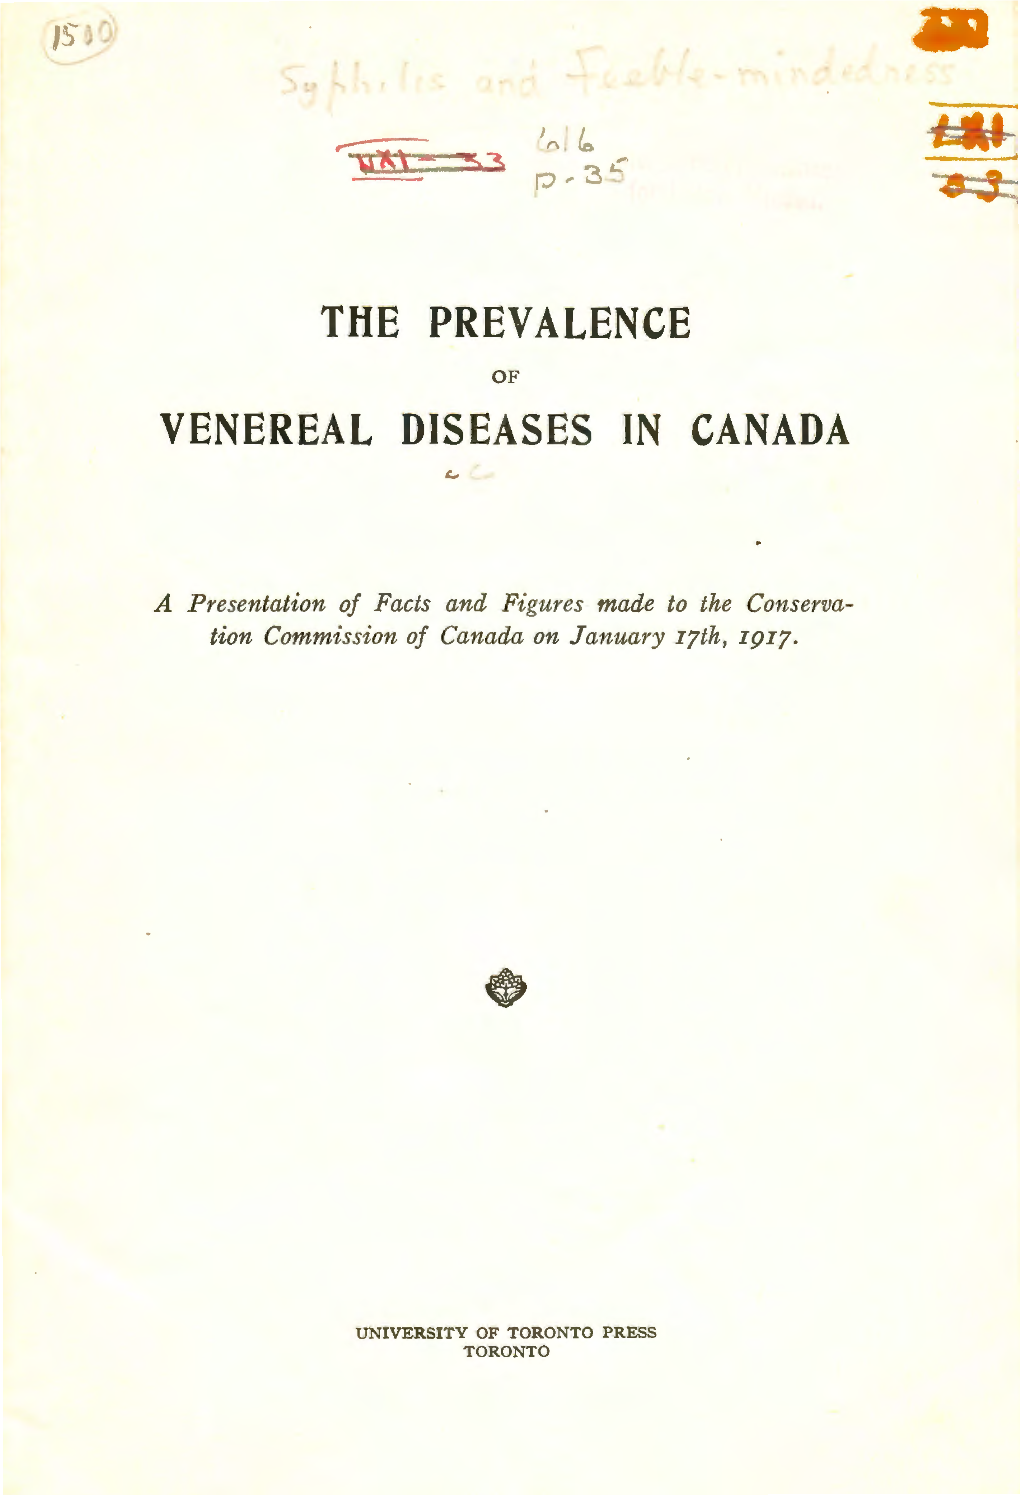 The Prevalence Venereal Diseases in Canada